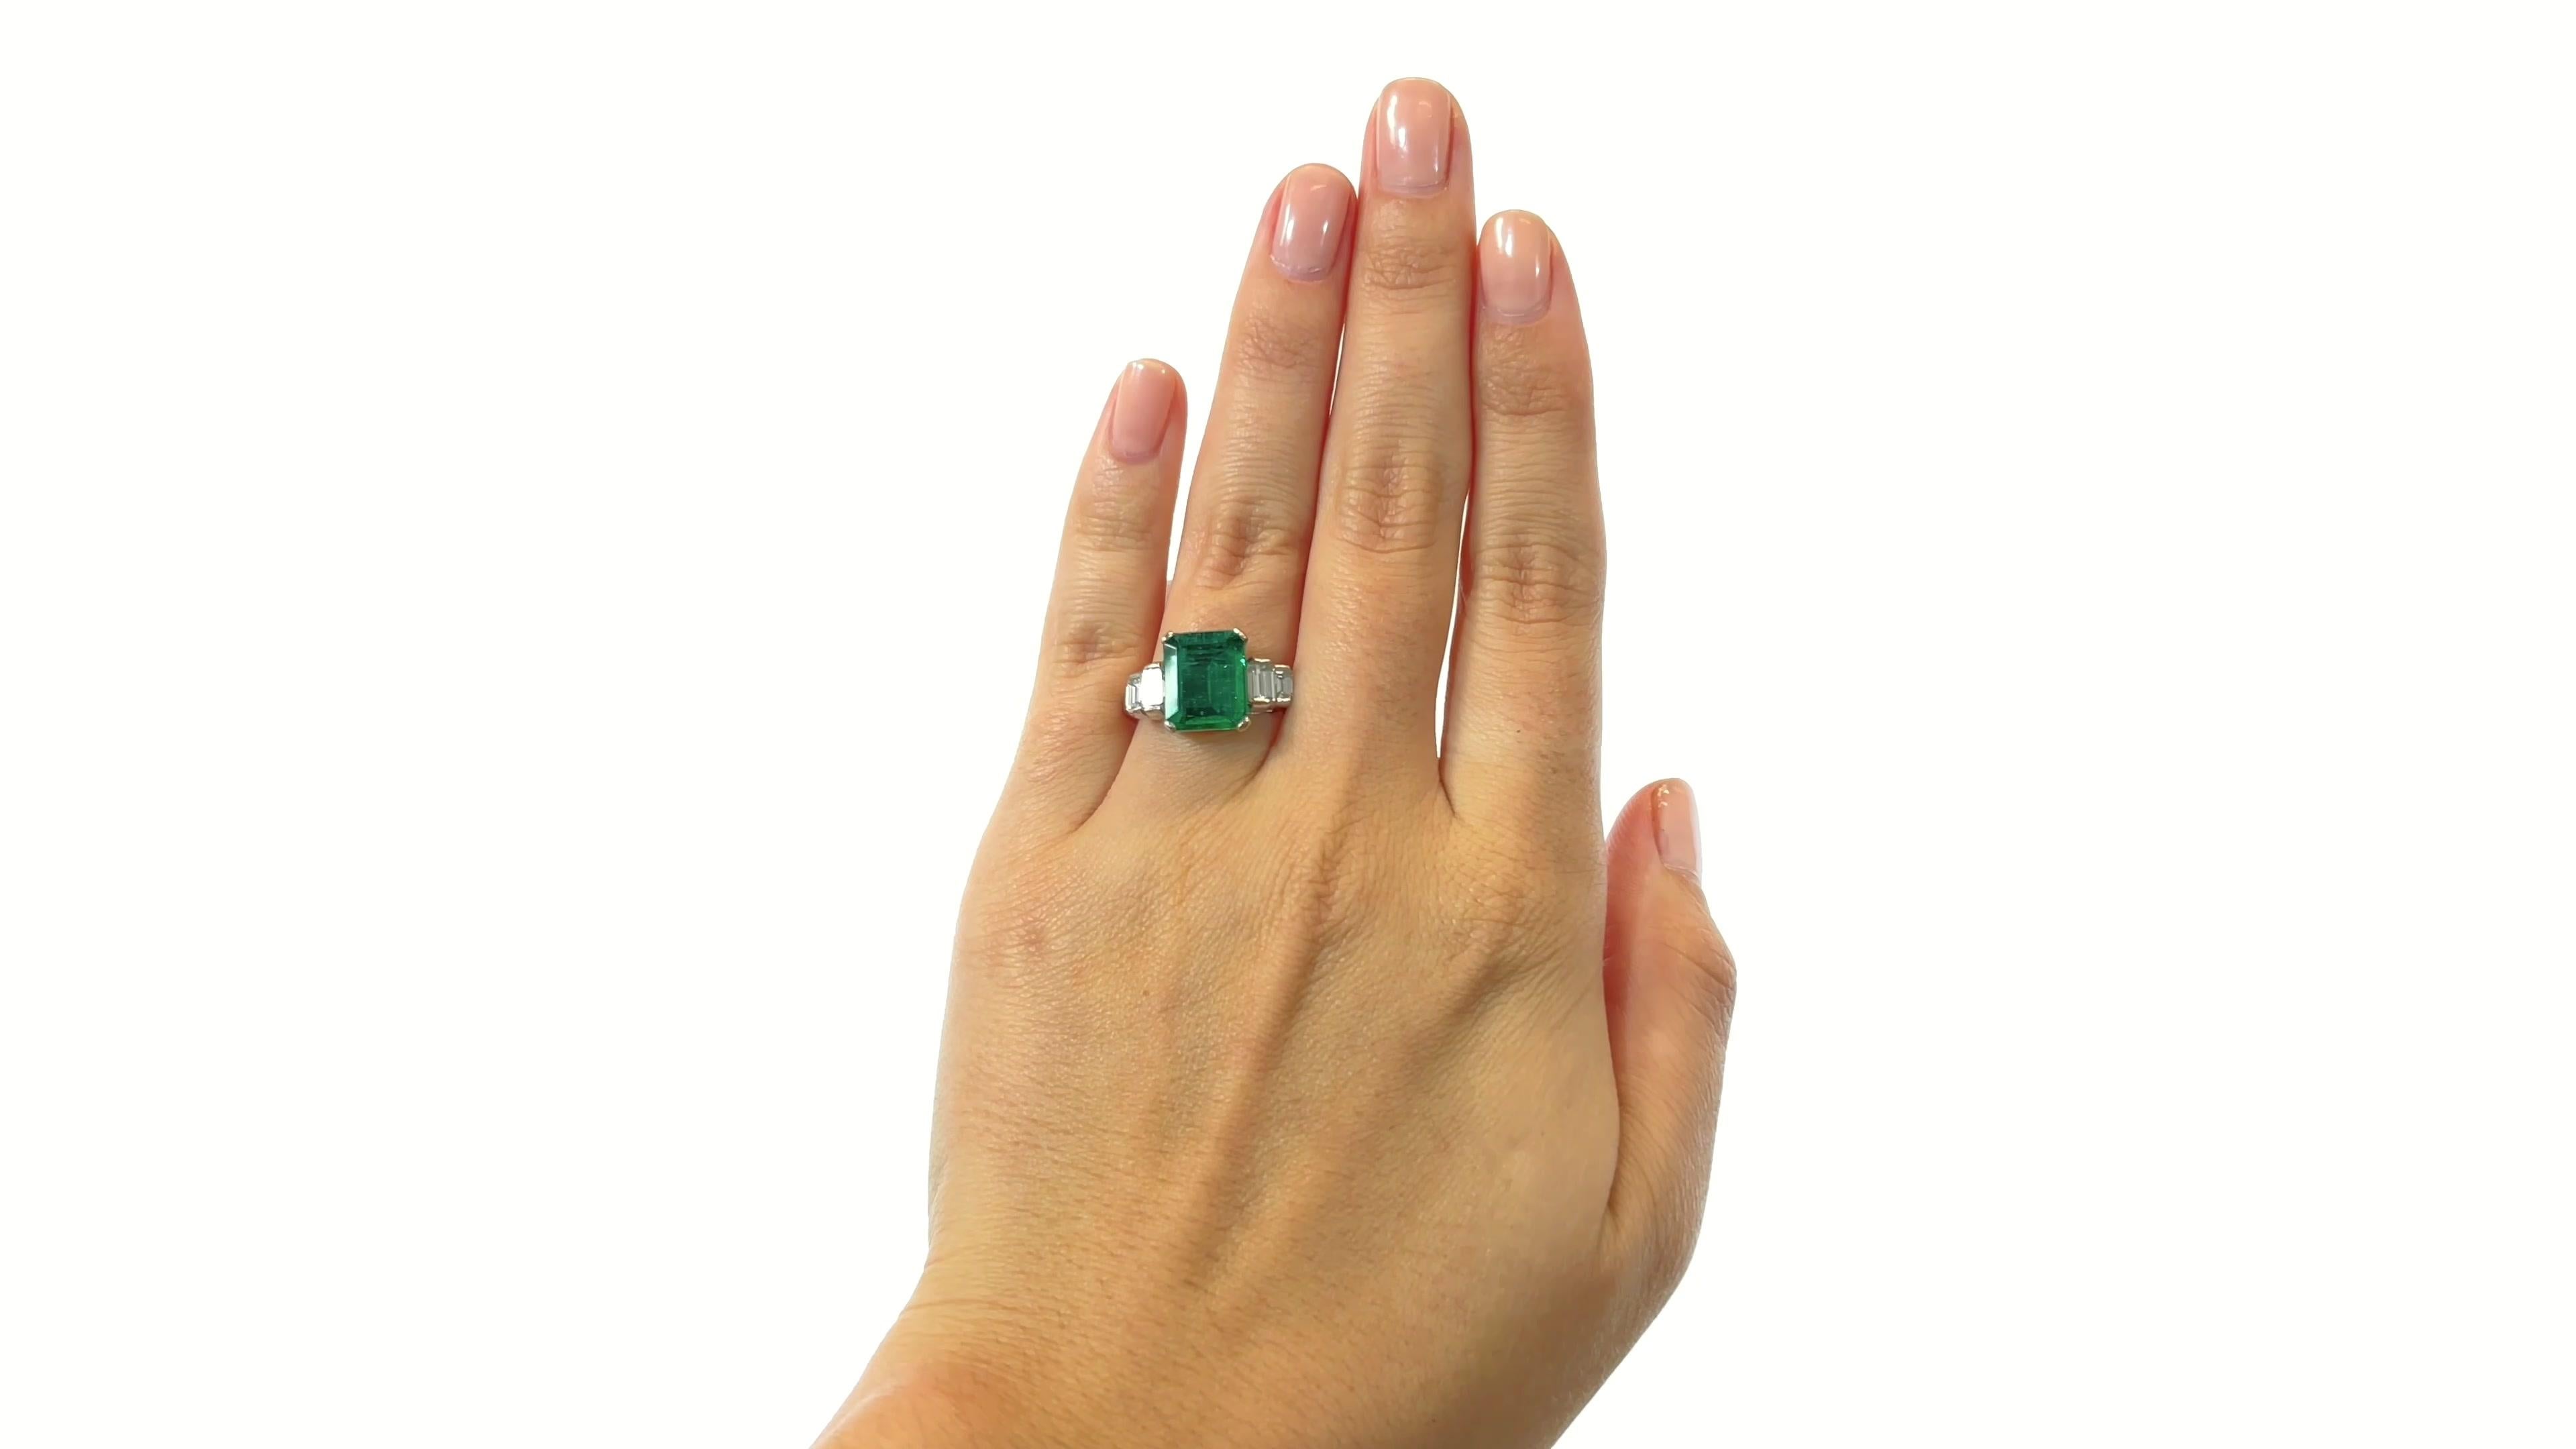 Zambian emeralds are known for their warm, vivid green color. Over many centuries, folklore tales told us about the healing properties of emeralds. Among them are fertility, eye healing, and luck. Acquire a jewel that is not only pleasant to the eye